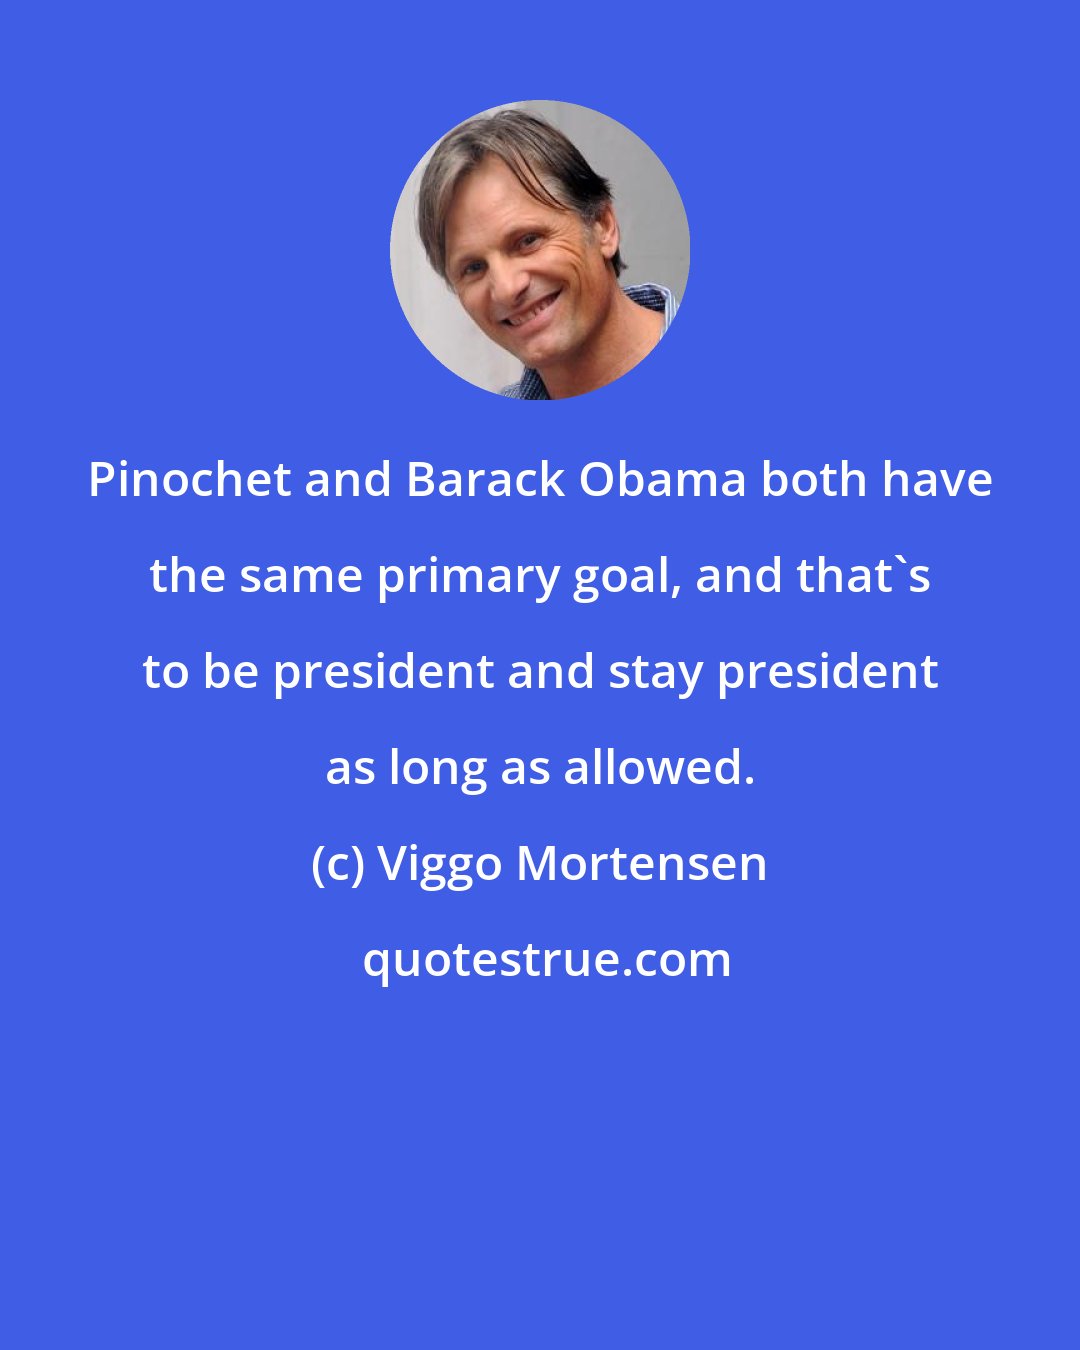 Viggo Mortensen: Pinochet and Barack Obama both have the same primary goal, and that's to be president and stay president as long as allowed.